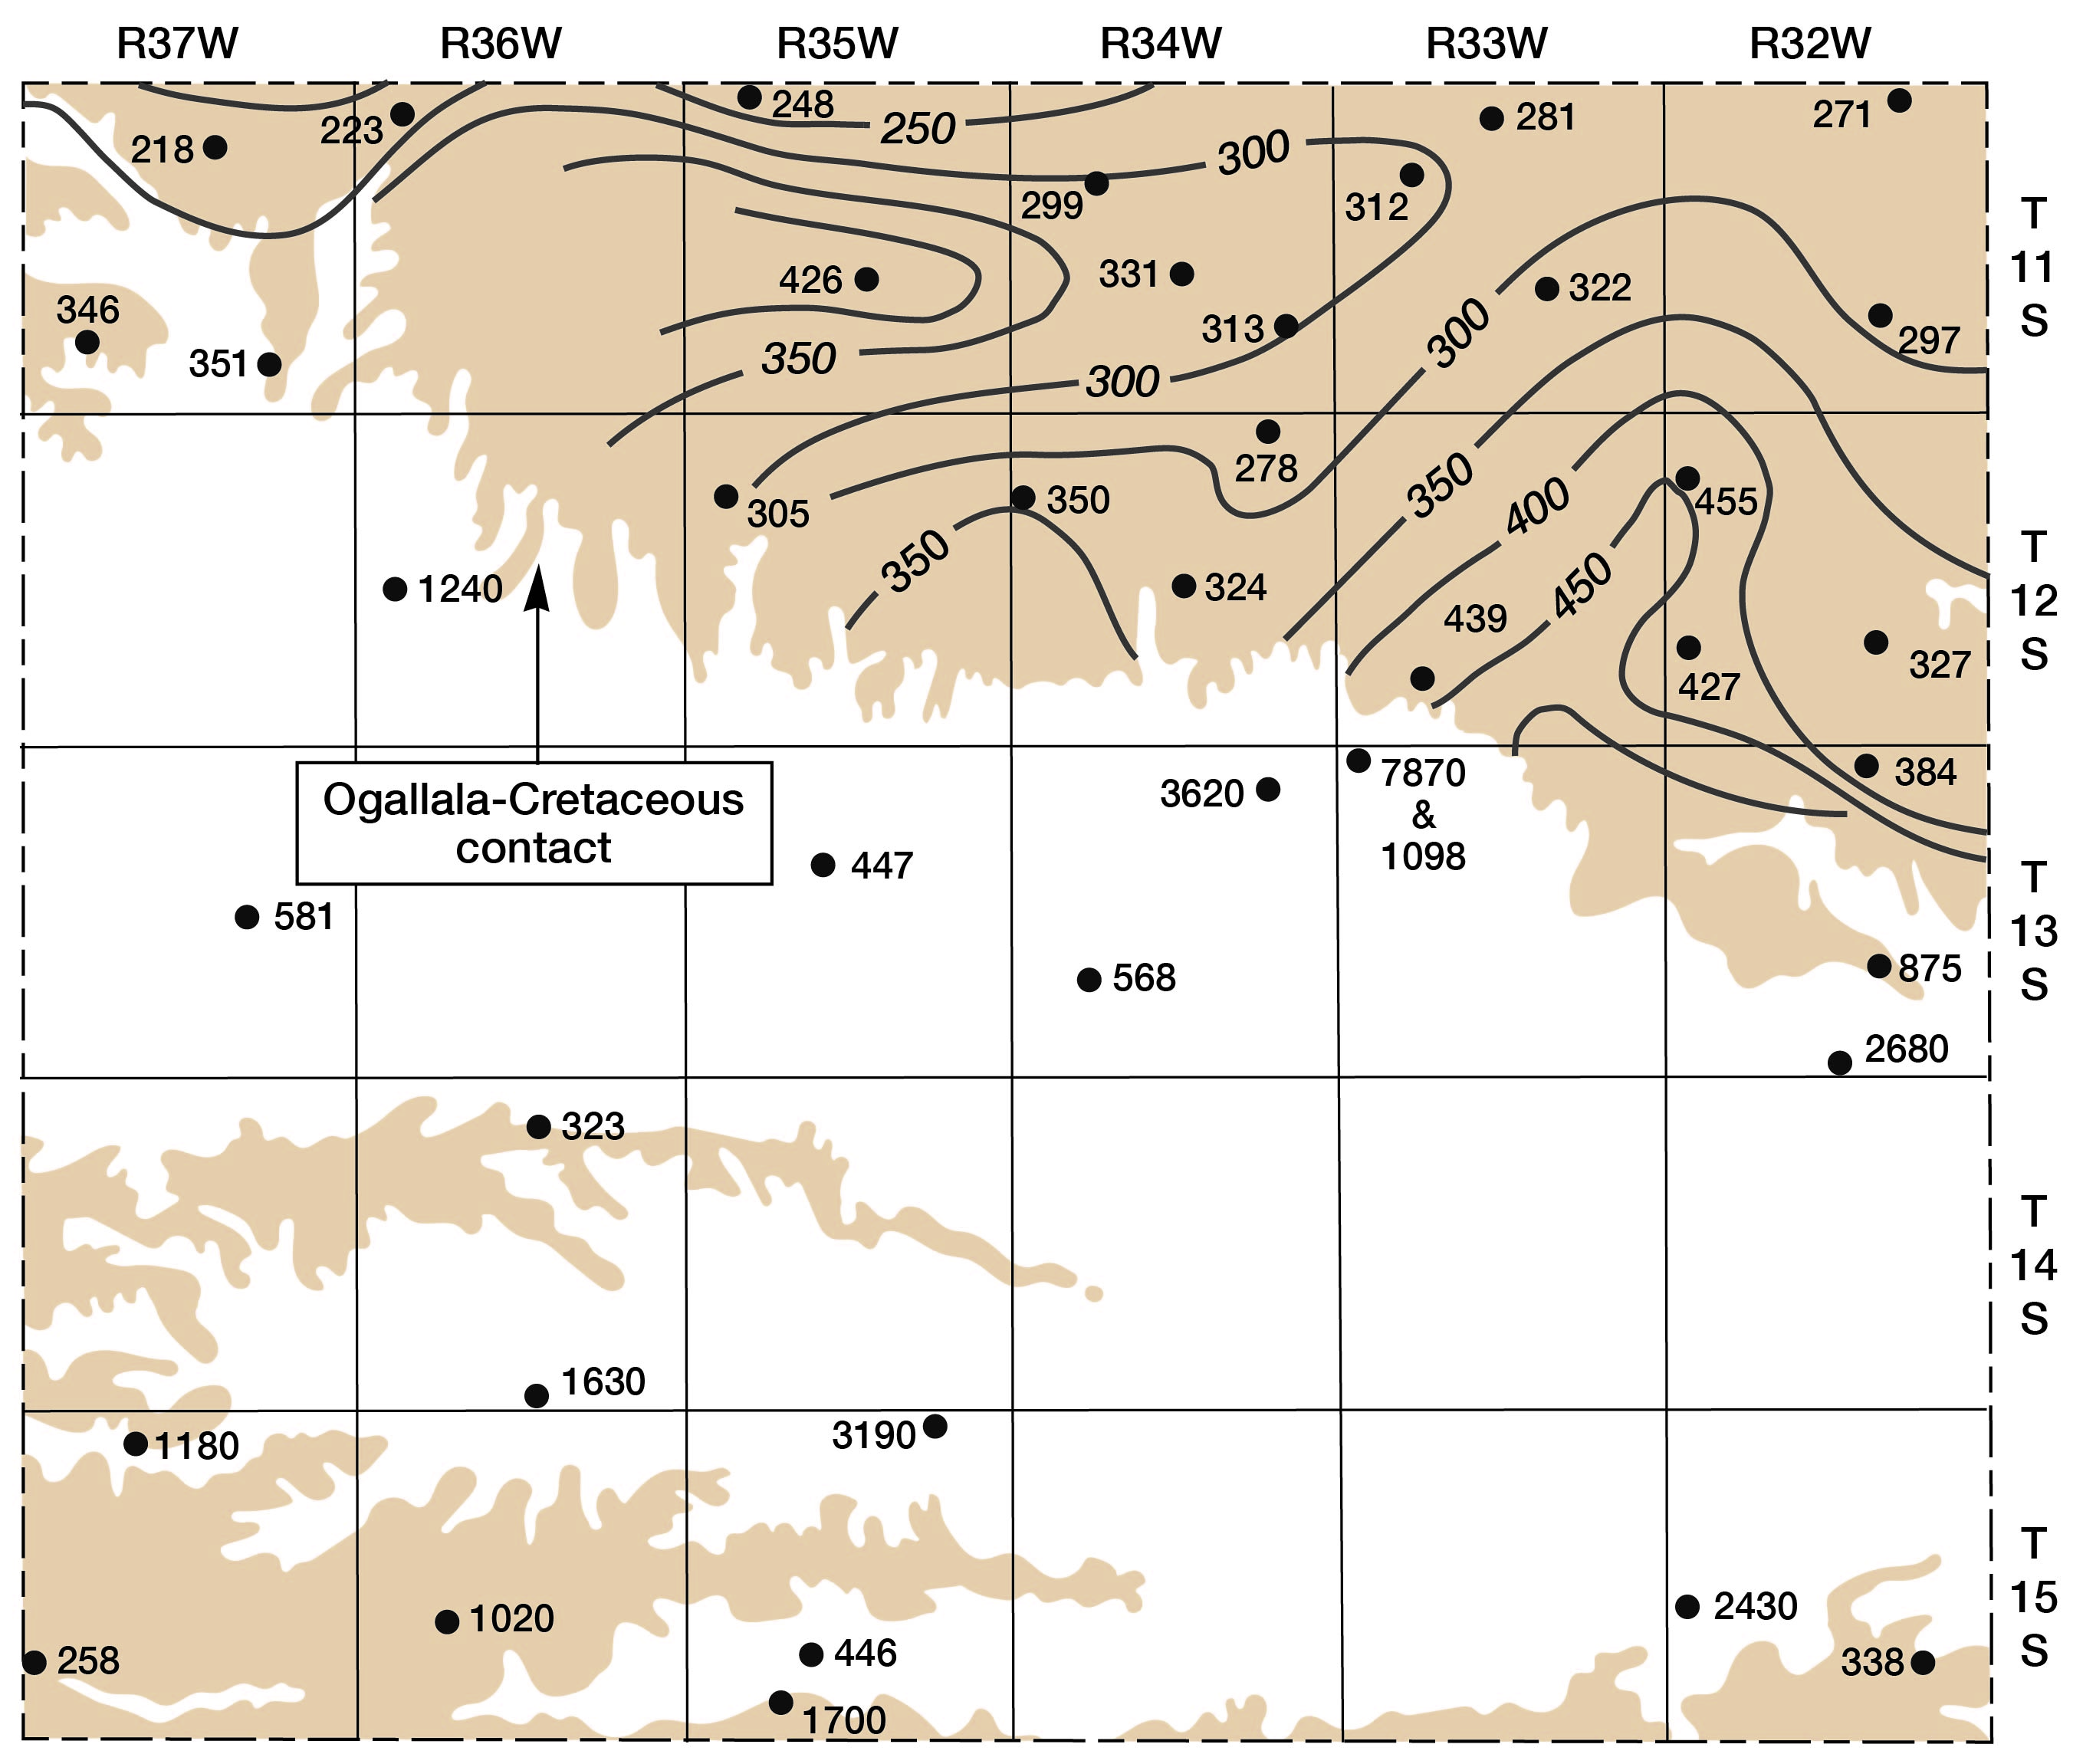 Contours of dissolved solids have ranges of 200 in NW to 450 in east-central; slope tends to increas towards contact of Ogalla with Cretaceous.